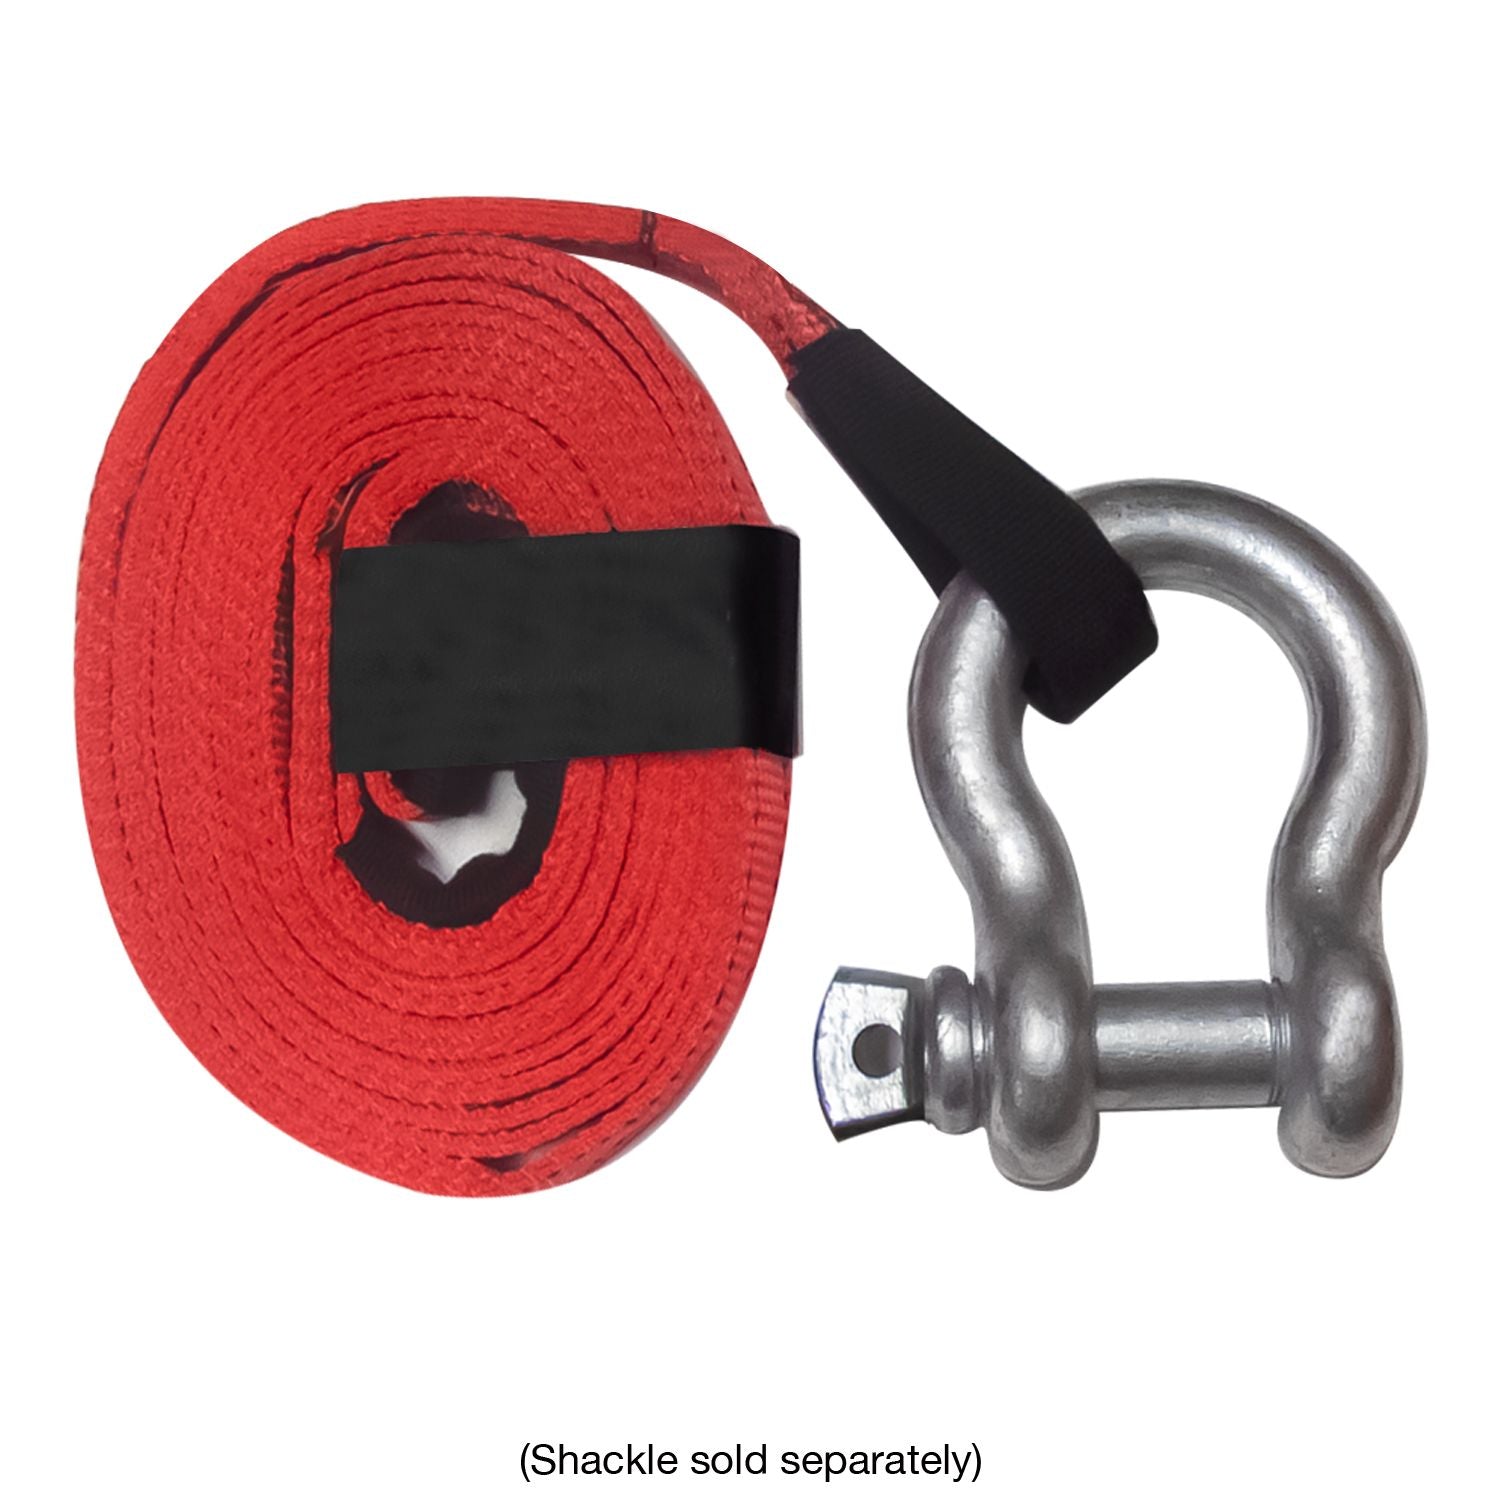 1 in x 15 ft Heavy Duty Tow Recovery Strap 7,000 lb